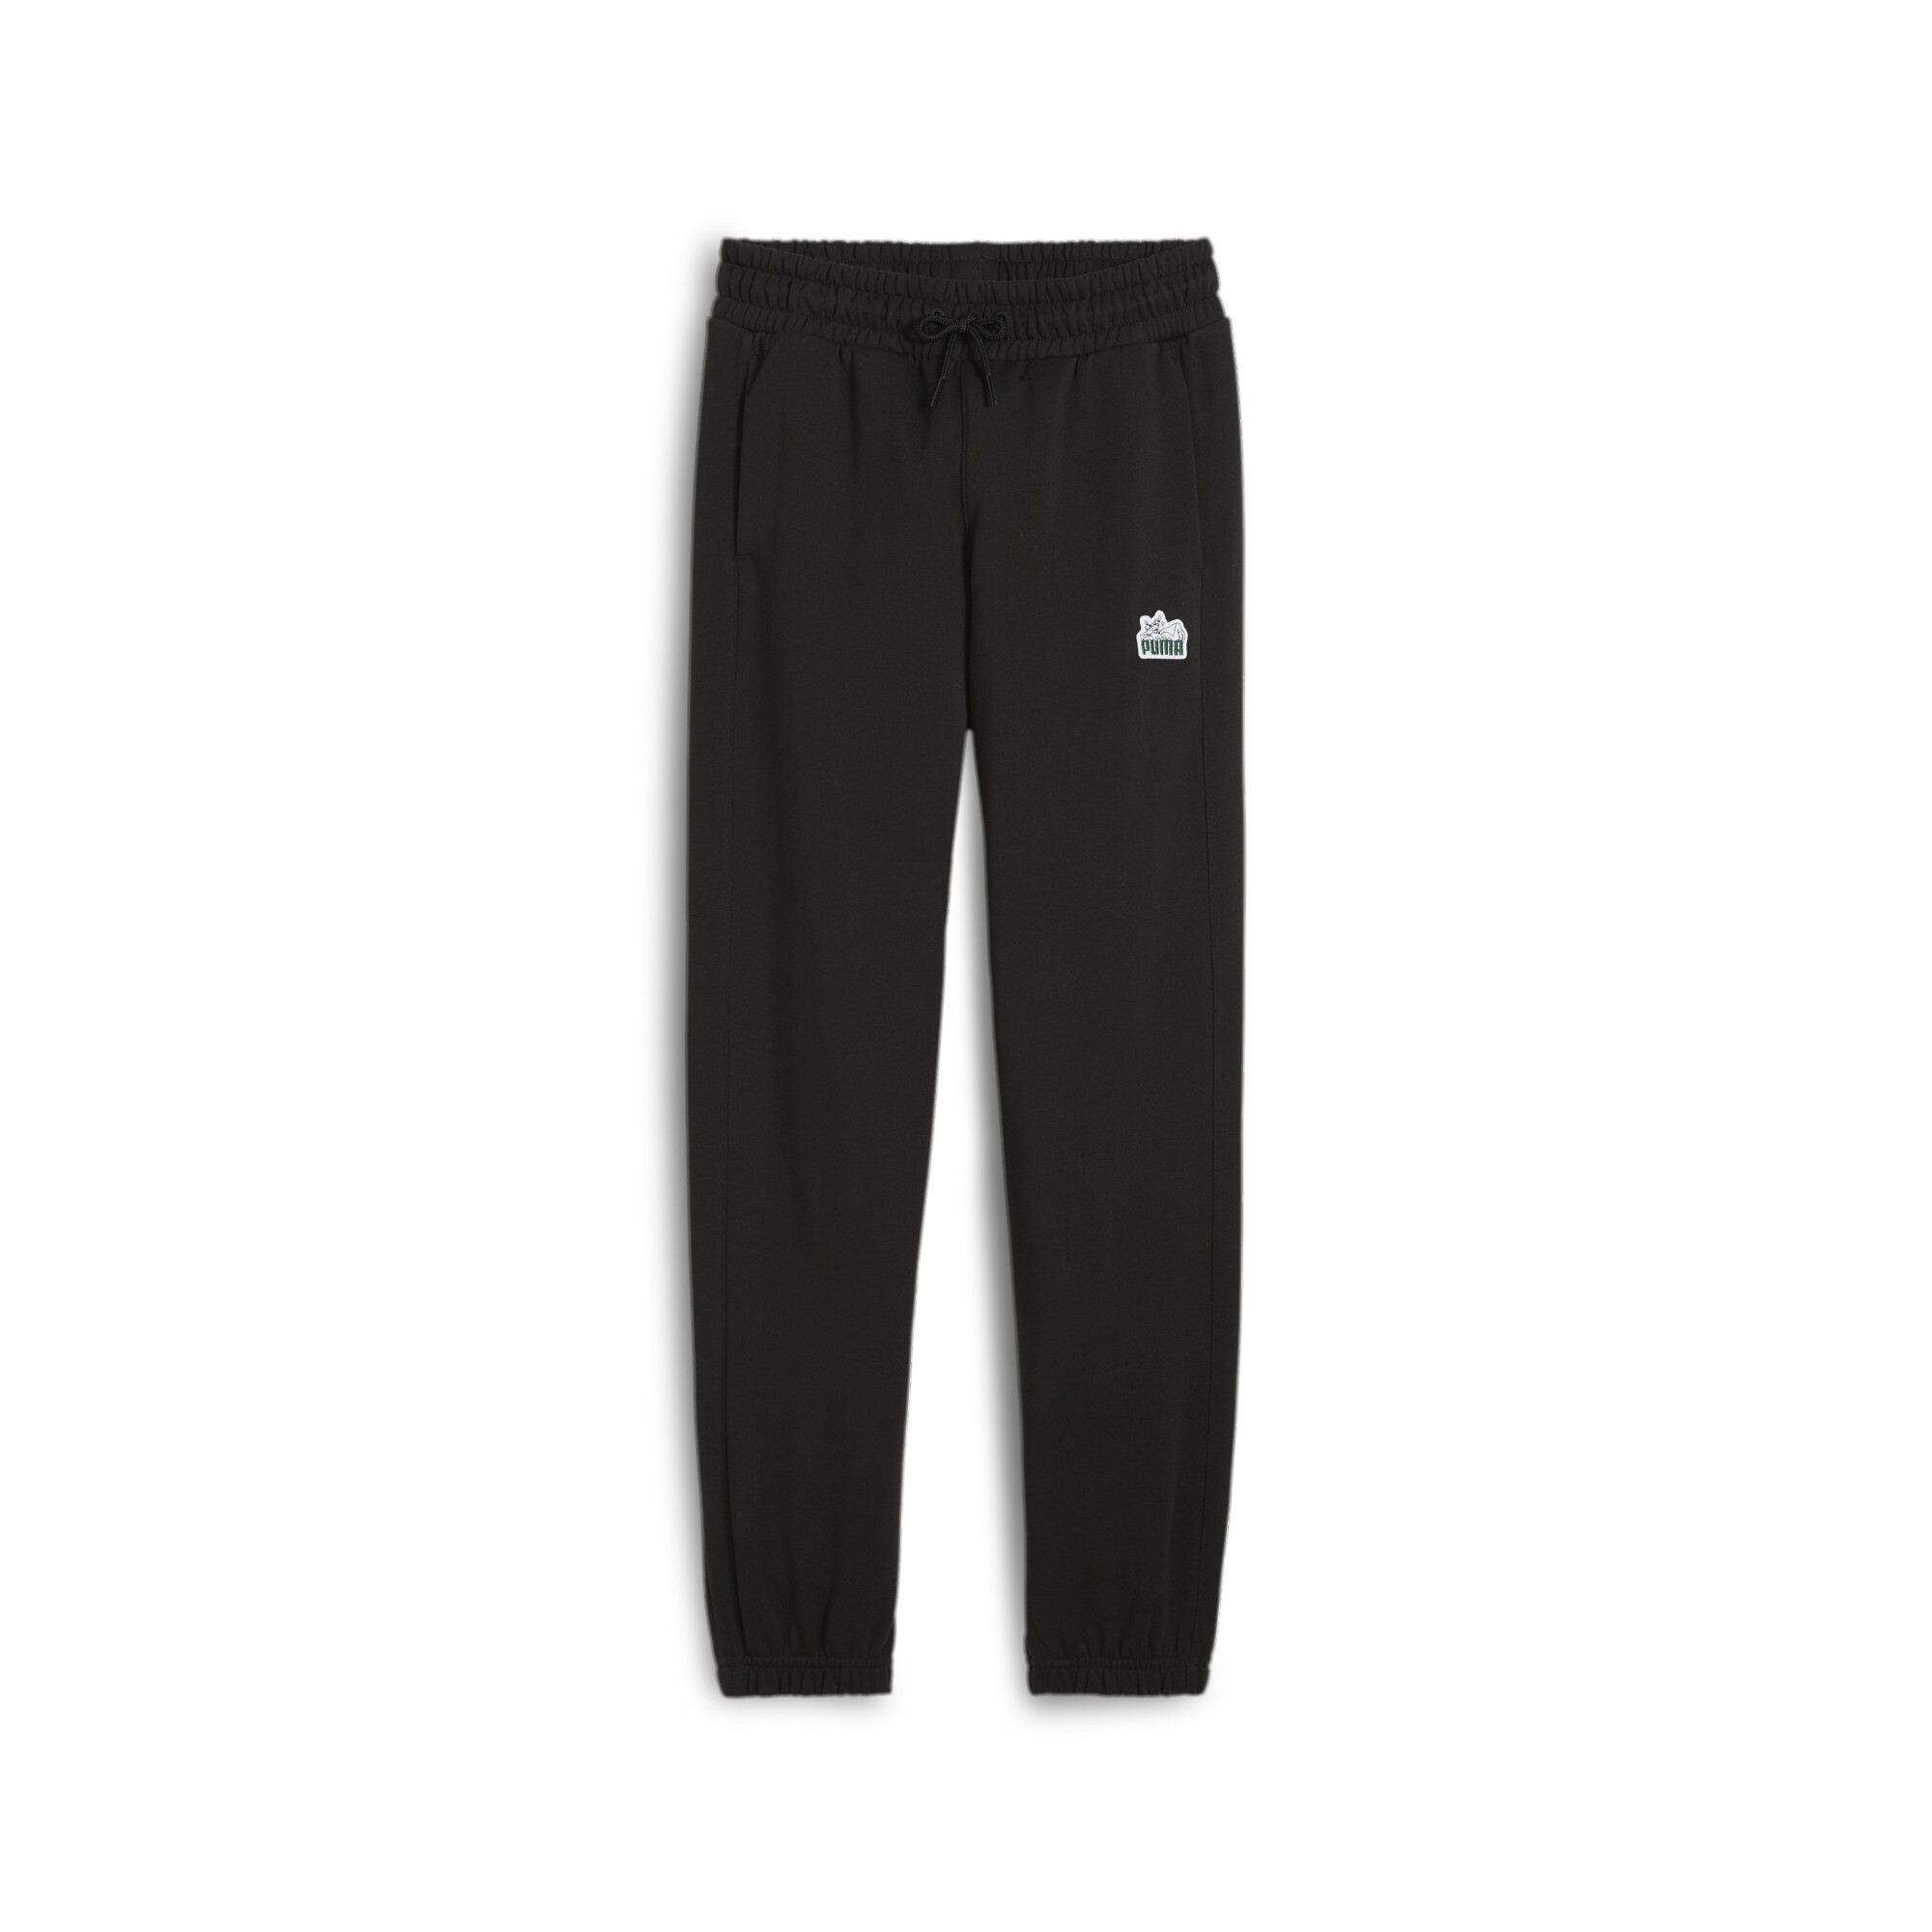 PUMA FOR THE FANBASE Sweatpants In Black, Size 9-10 Youth